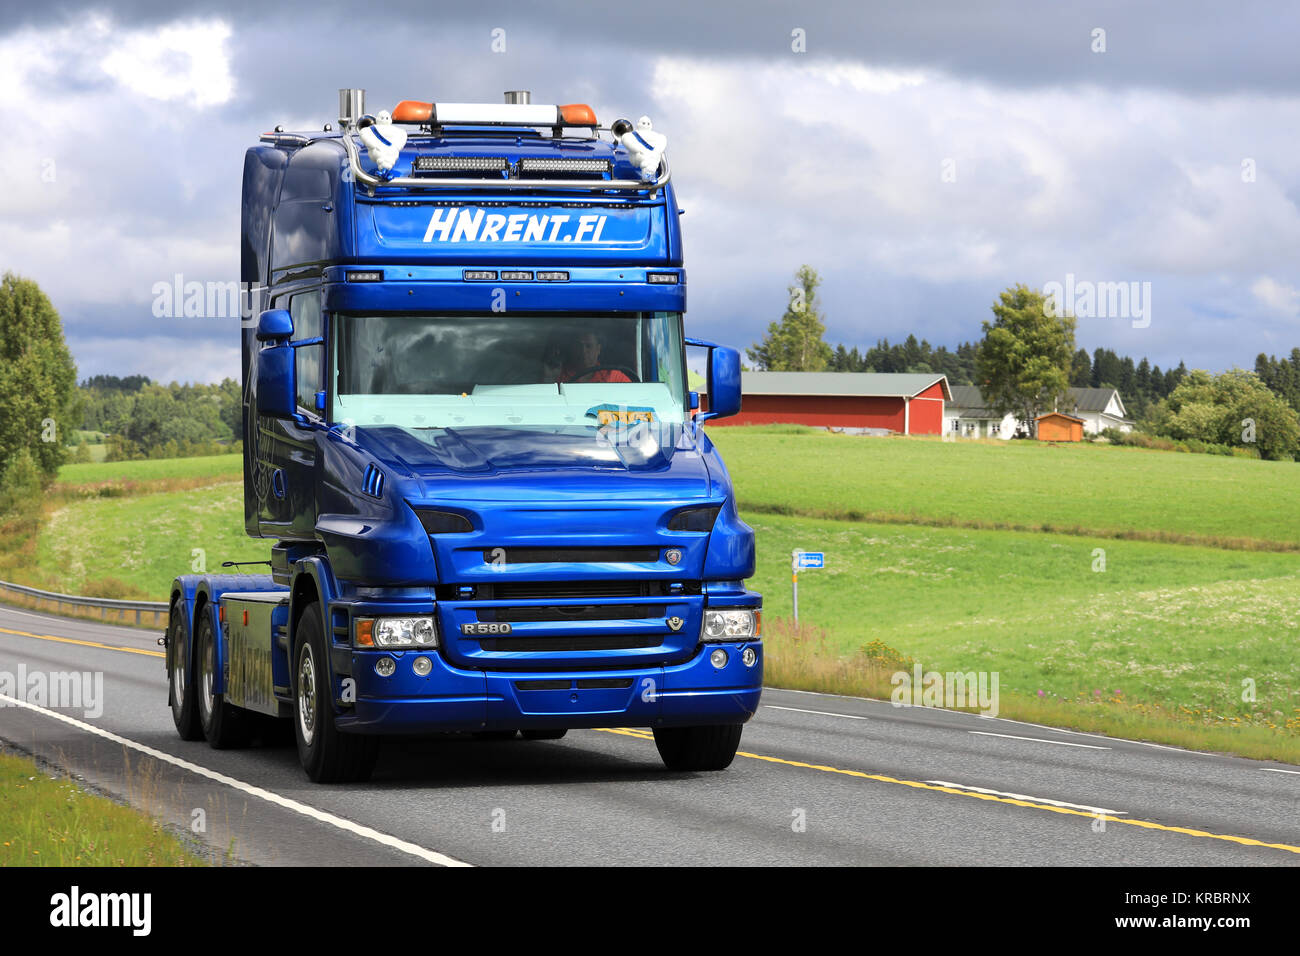 IKAALINEN, FINLAND - AUGUST 13, 2017: Blue Scania R580 truck with conventional cab of HN Rent.fi moves along highway at summer. Stock Photo